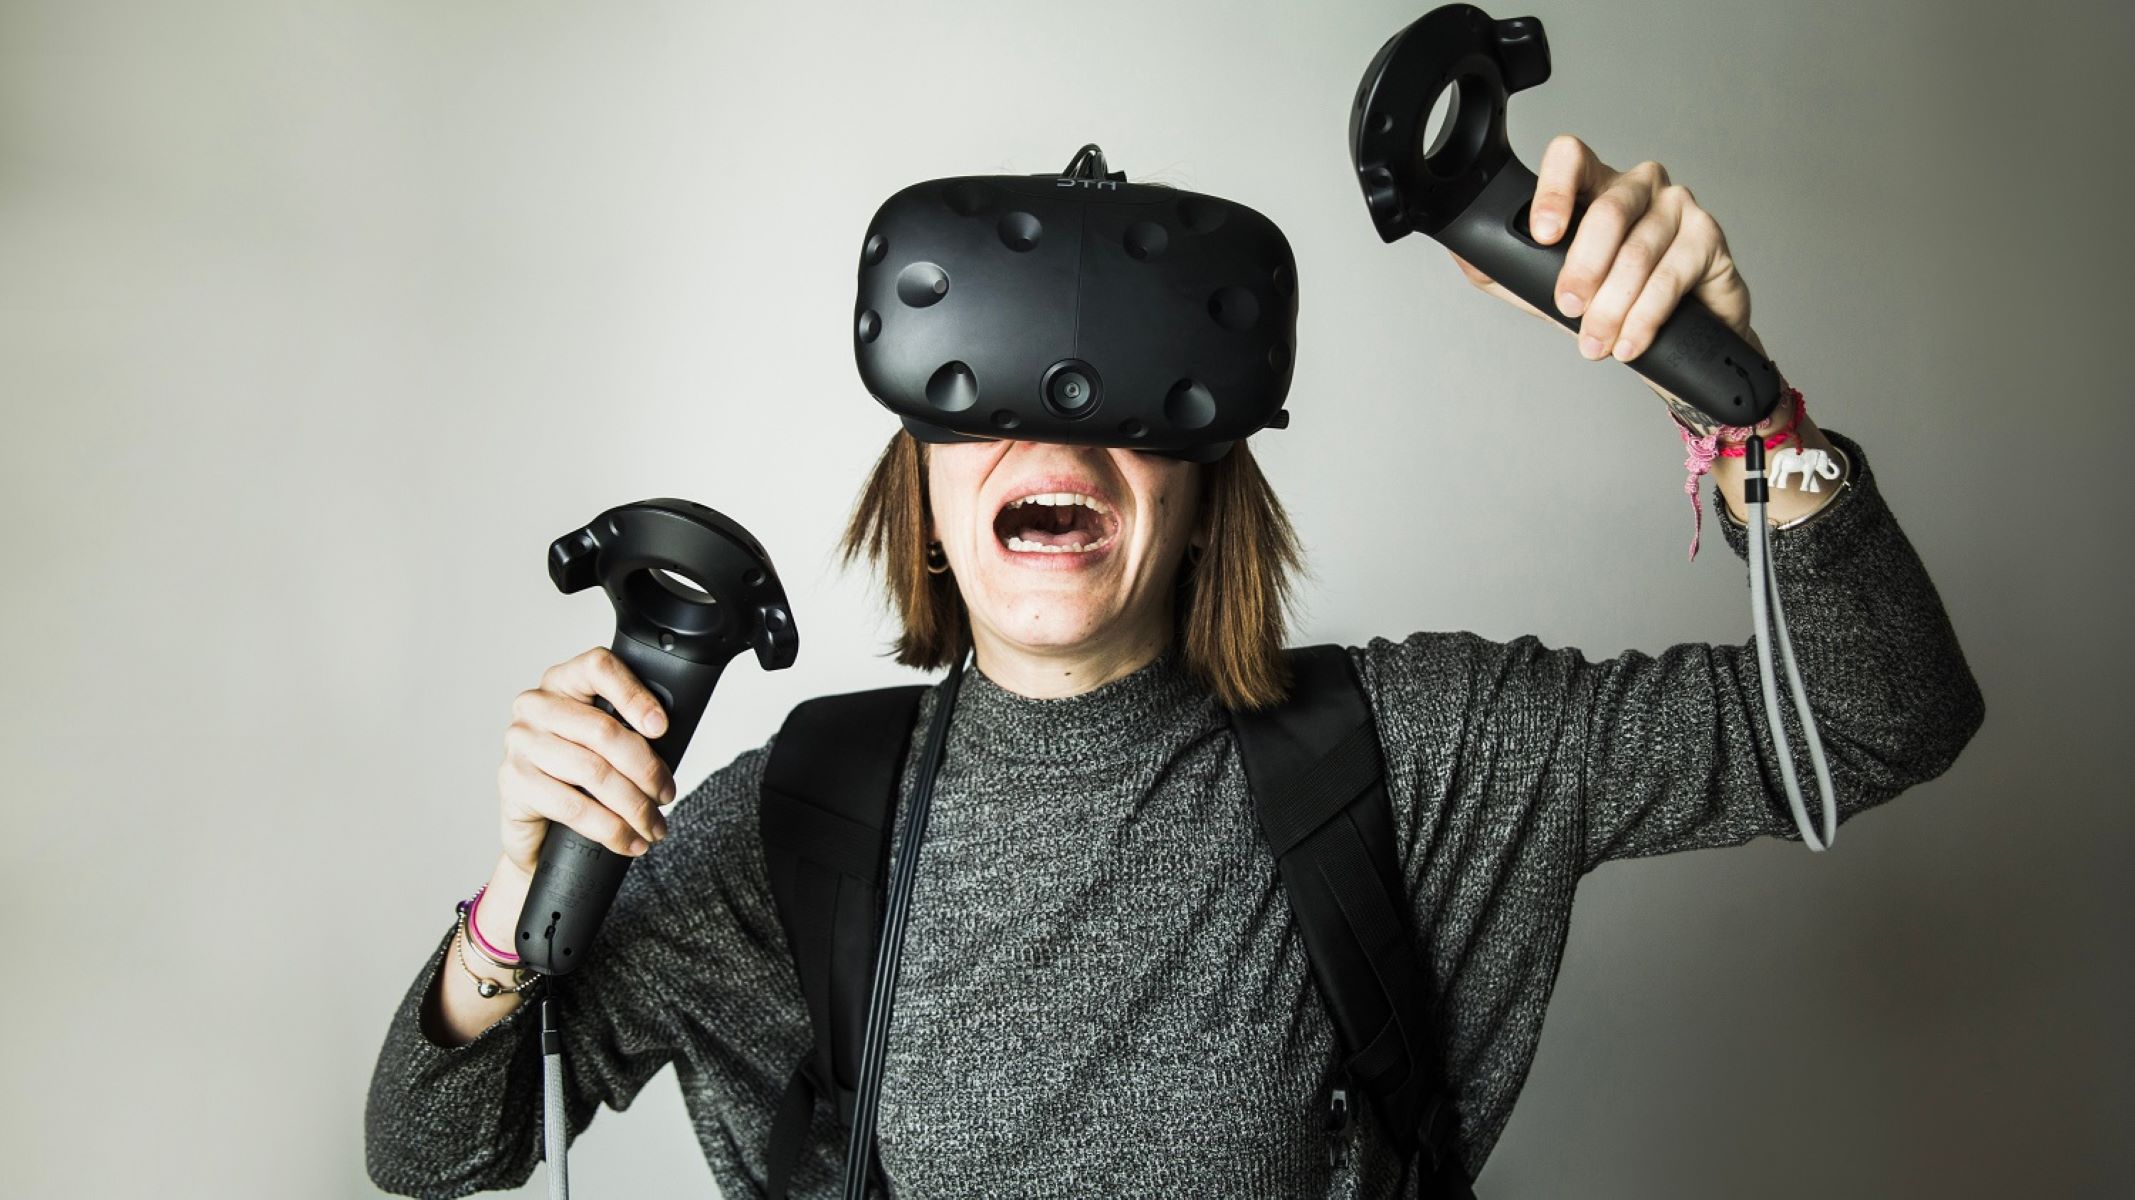 How To Play Oculus Game On The HTC Vive